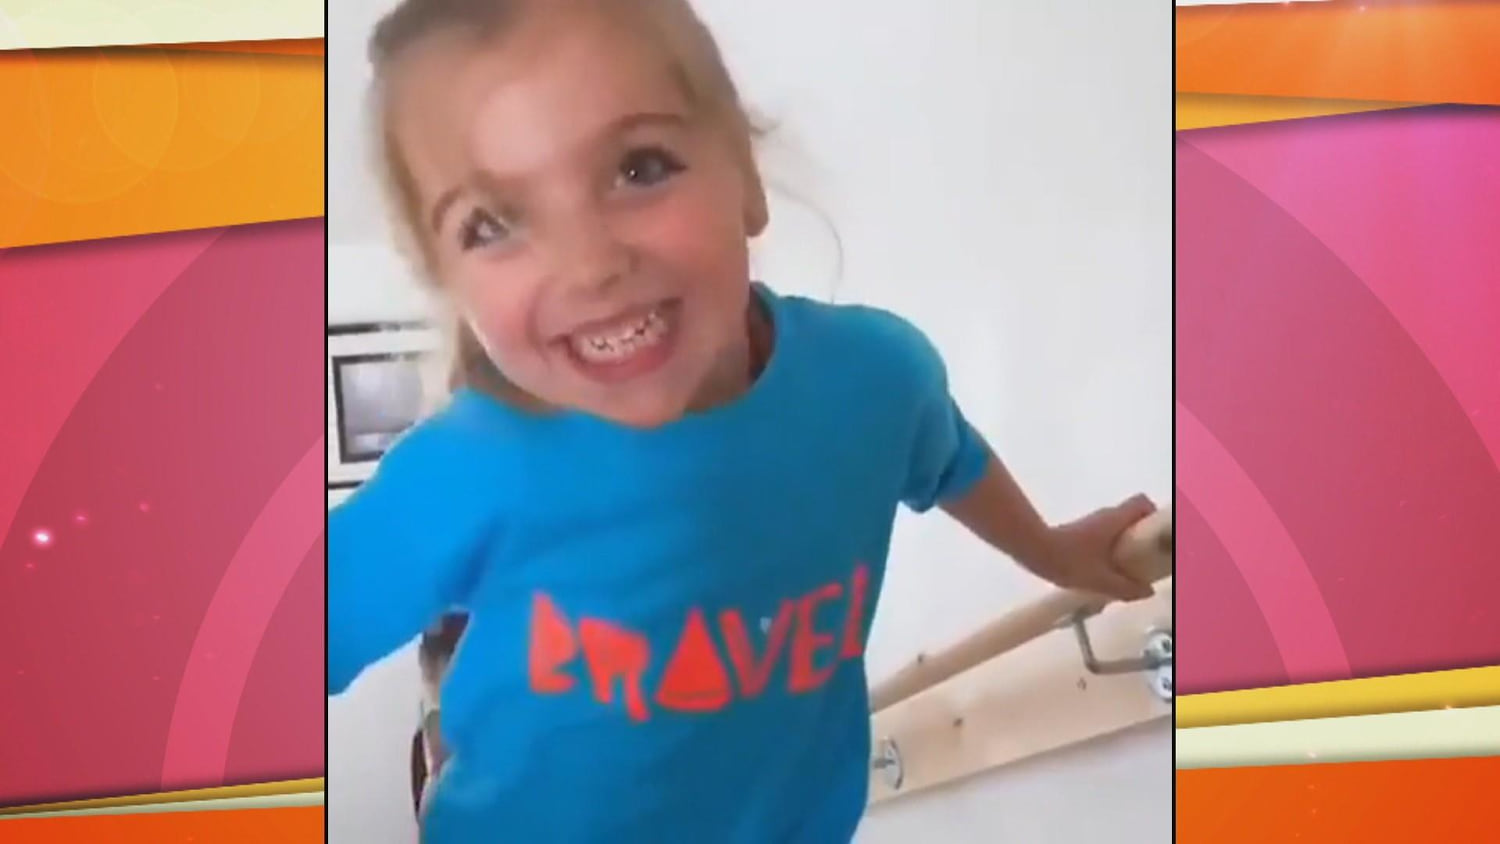 6-year-old girl with cerebral palsy has the sweetest reaction to taking  steps unaided - ABC News